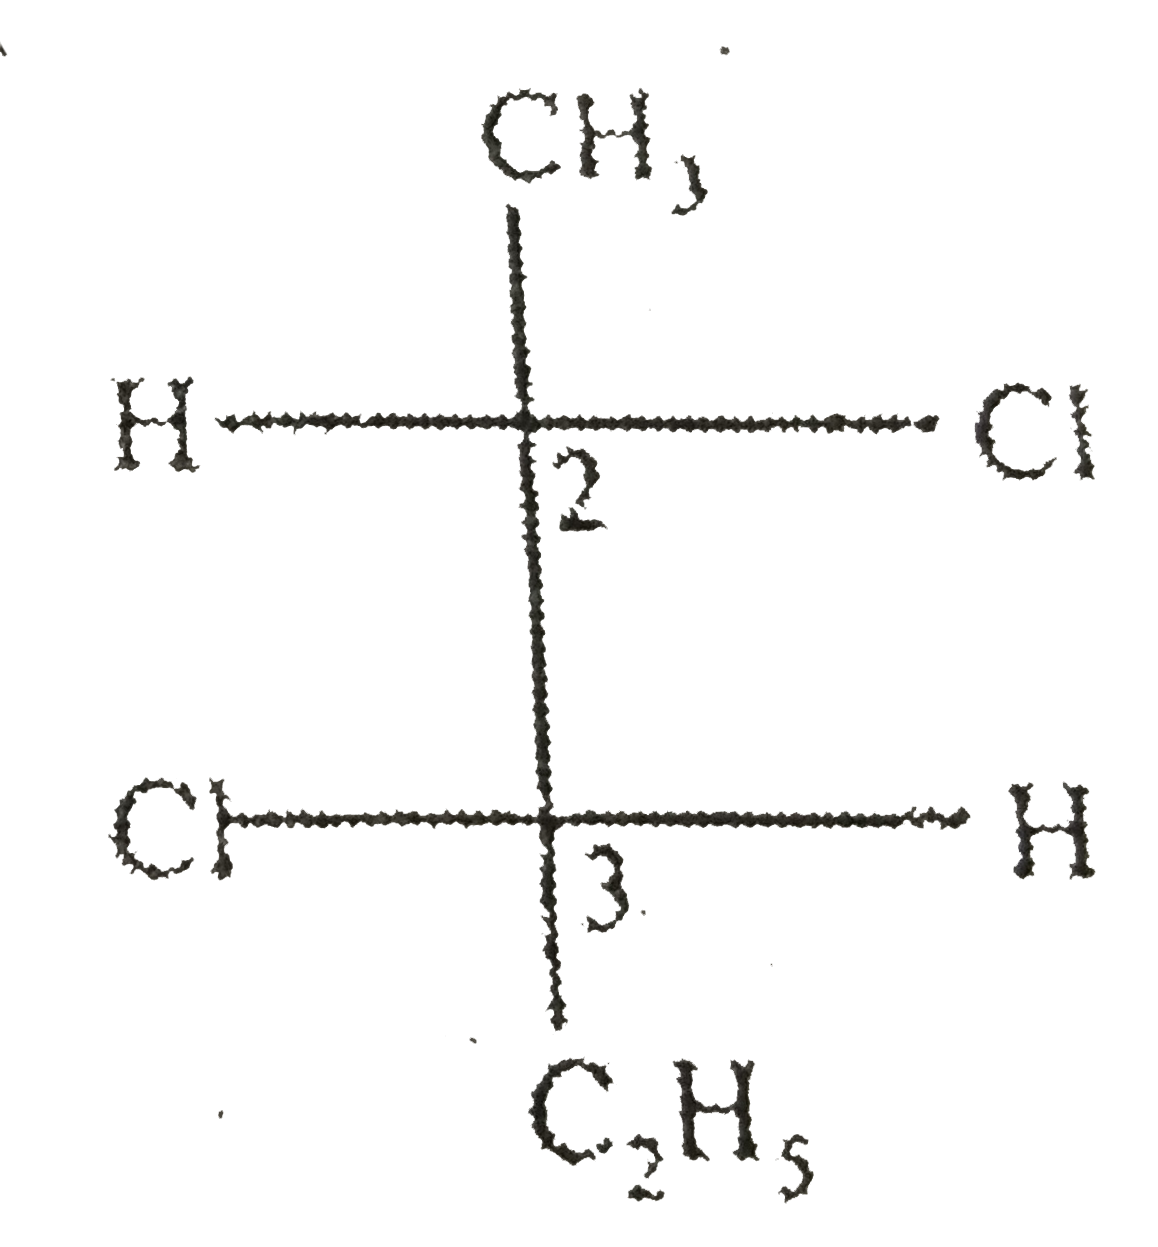 The absolute configuration of the following compound is